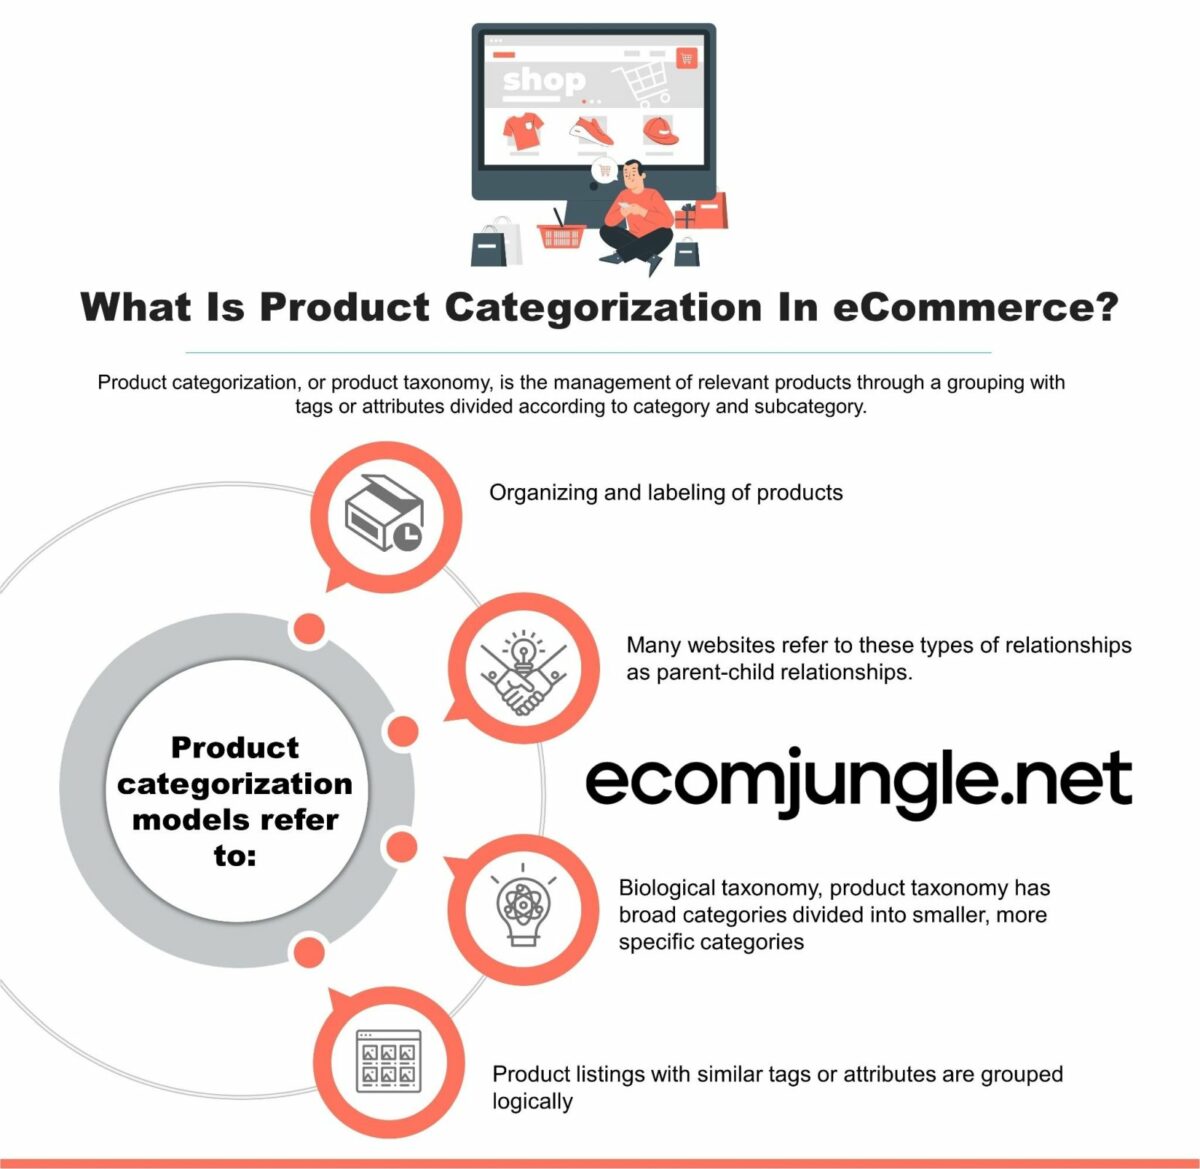 What Is Product Categorization In eCommerce?